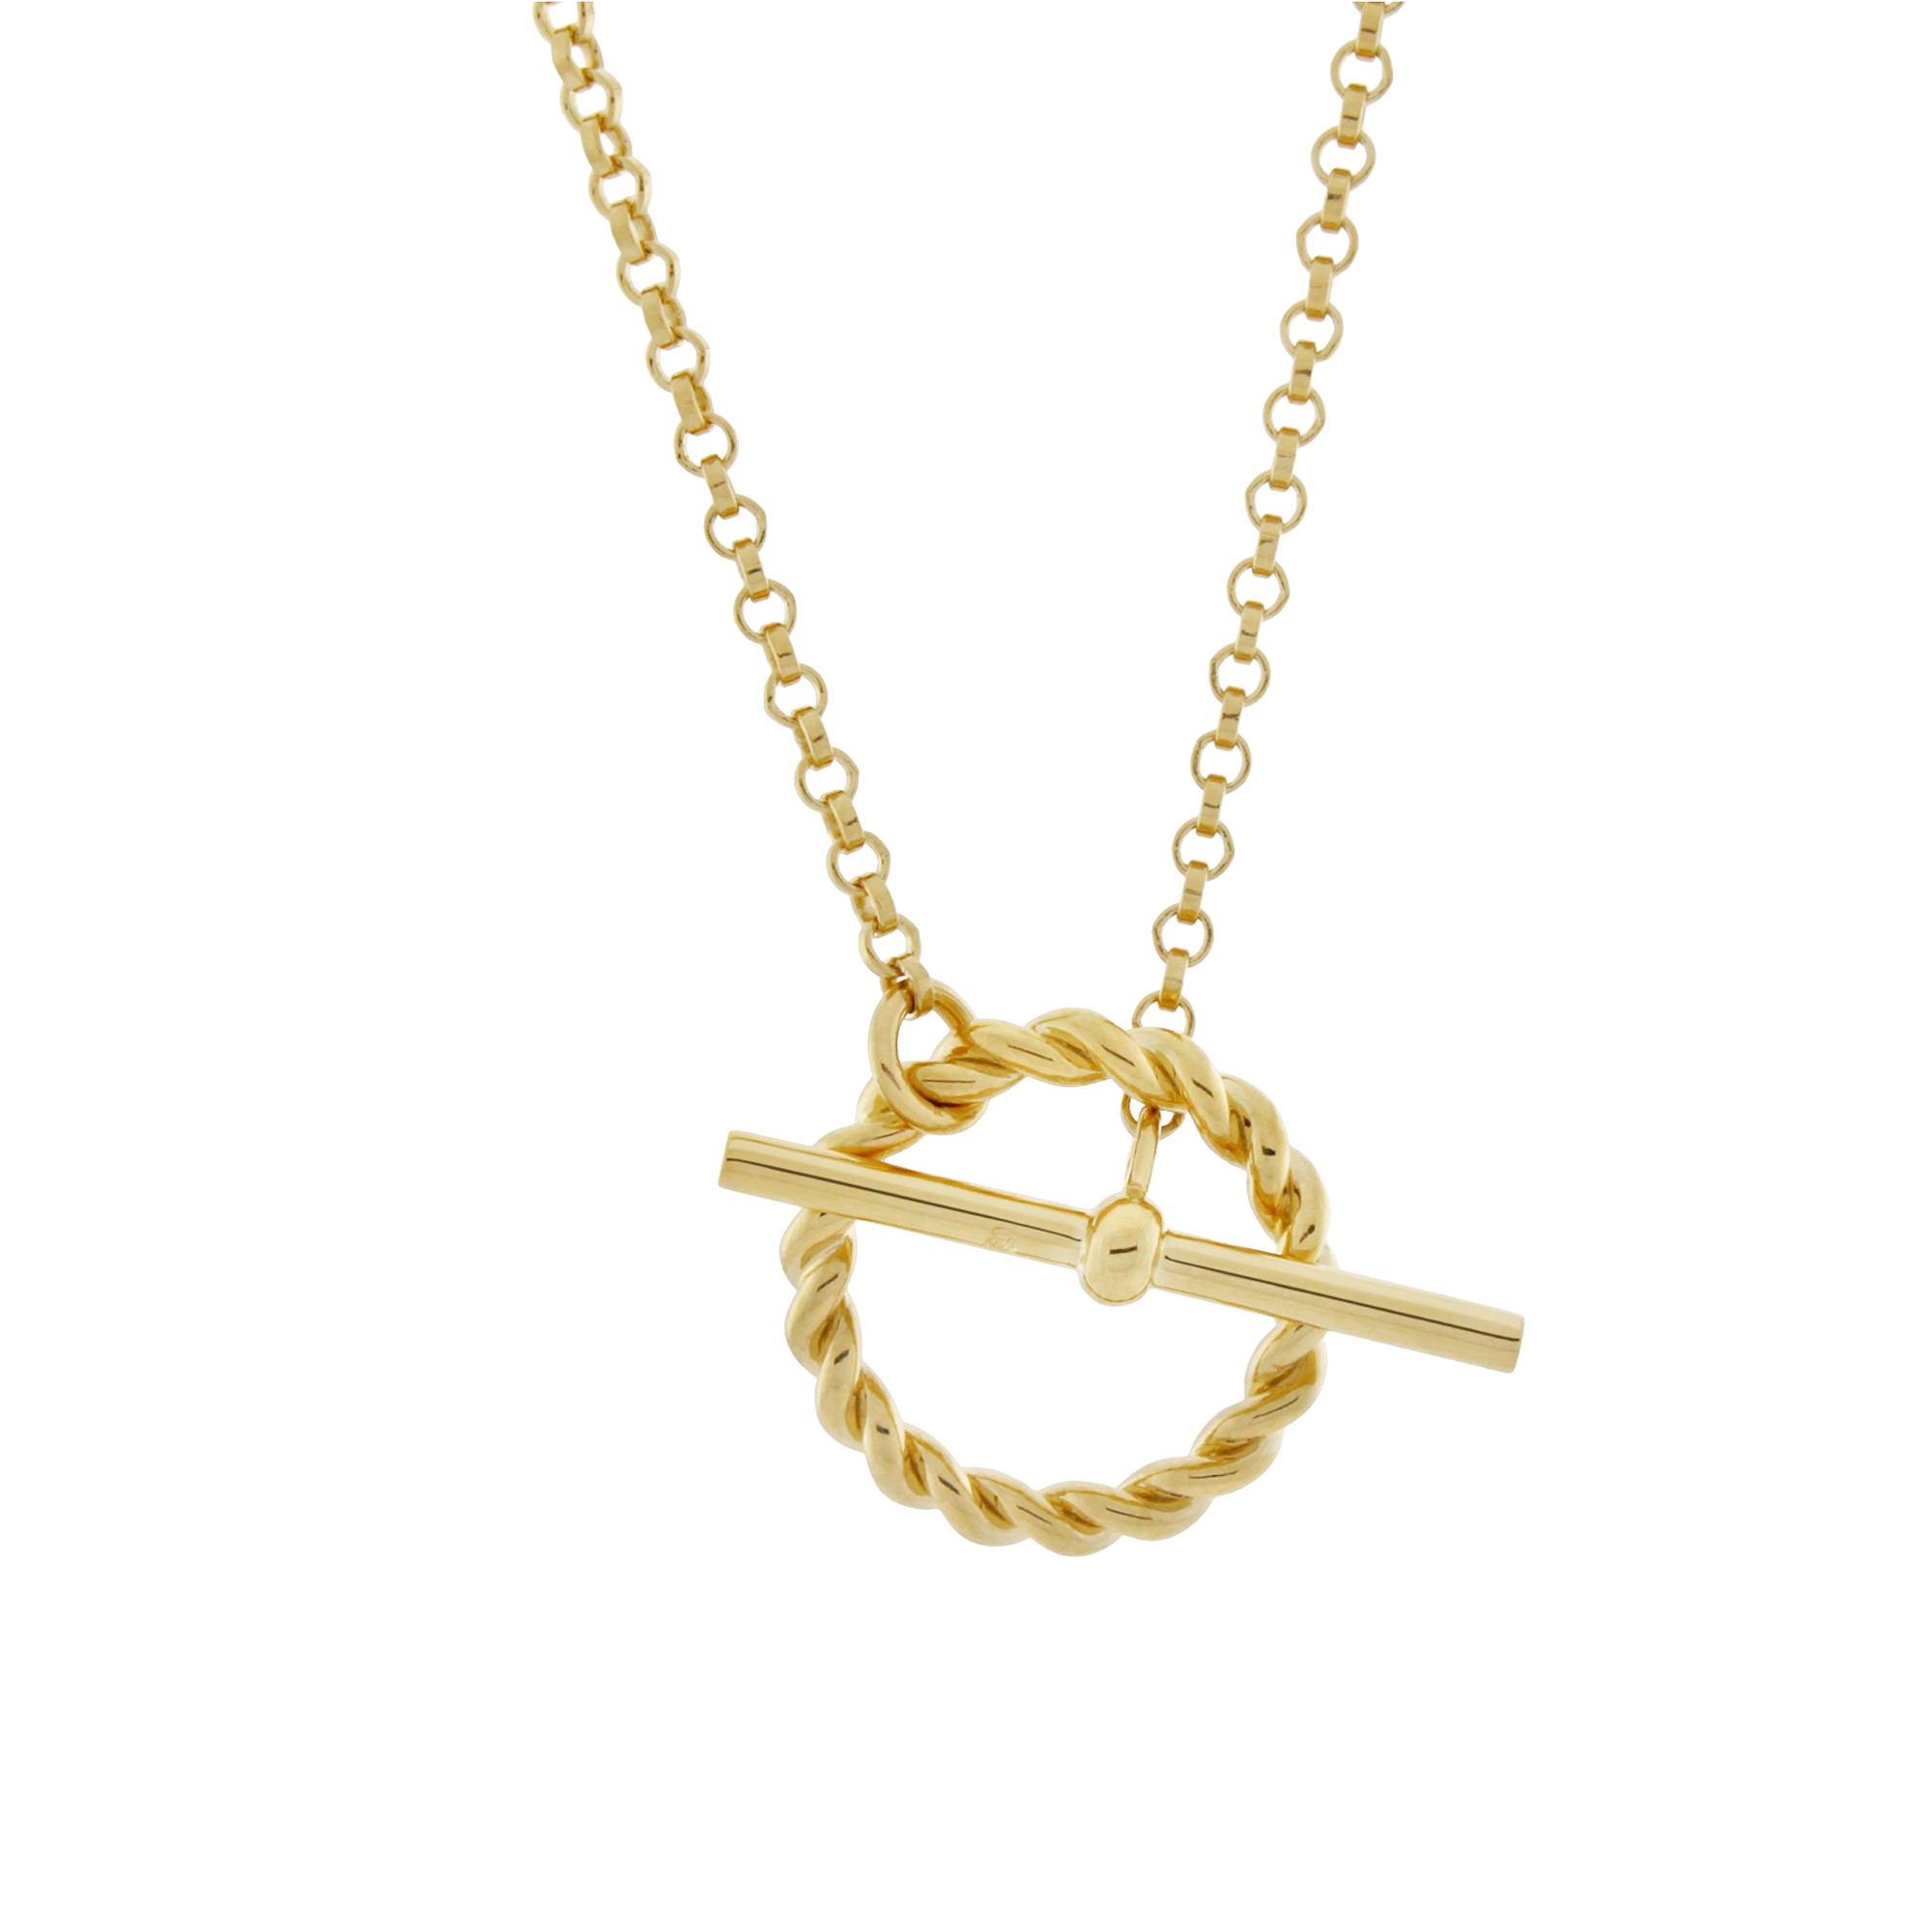 Corda_Necklace_Gold_Vermeil_Coppola_Collection_Monarc_Jewellery-removebg.png